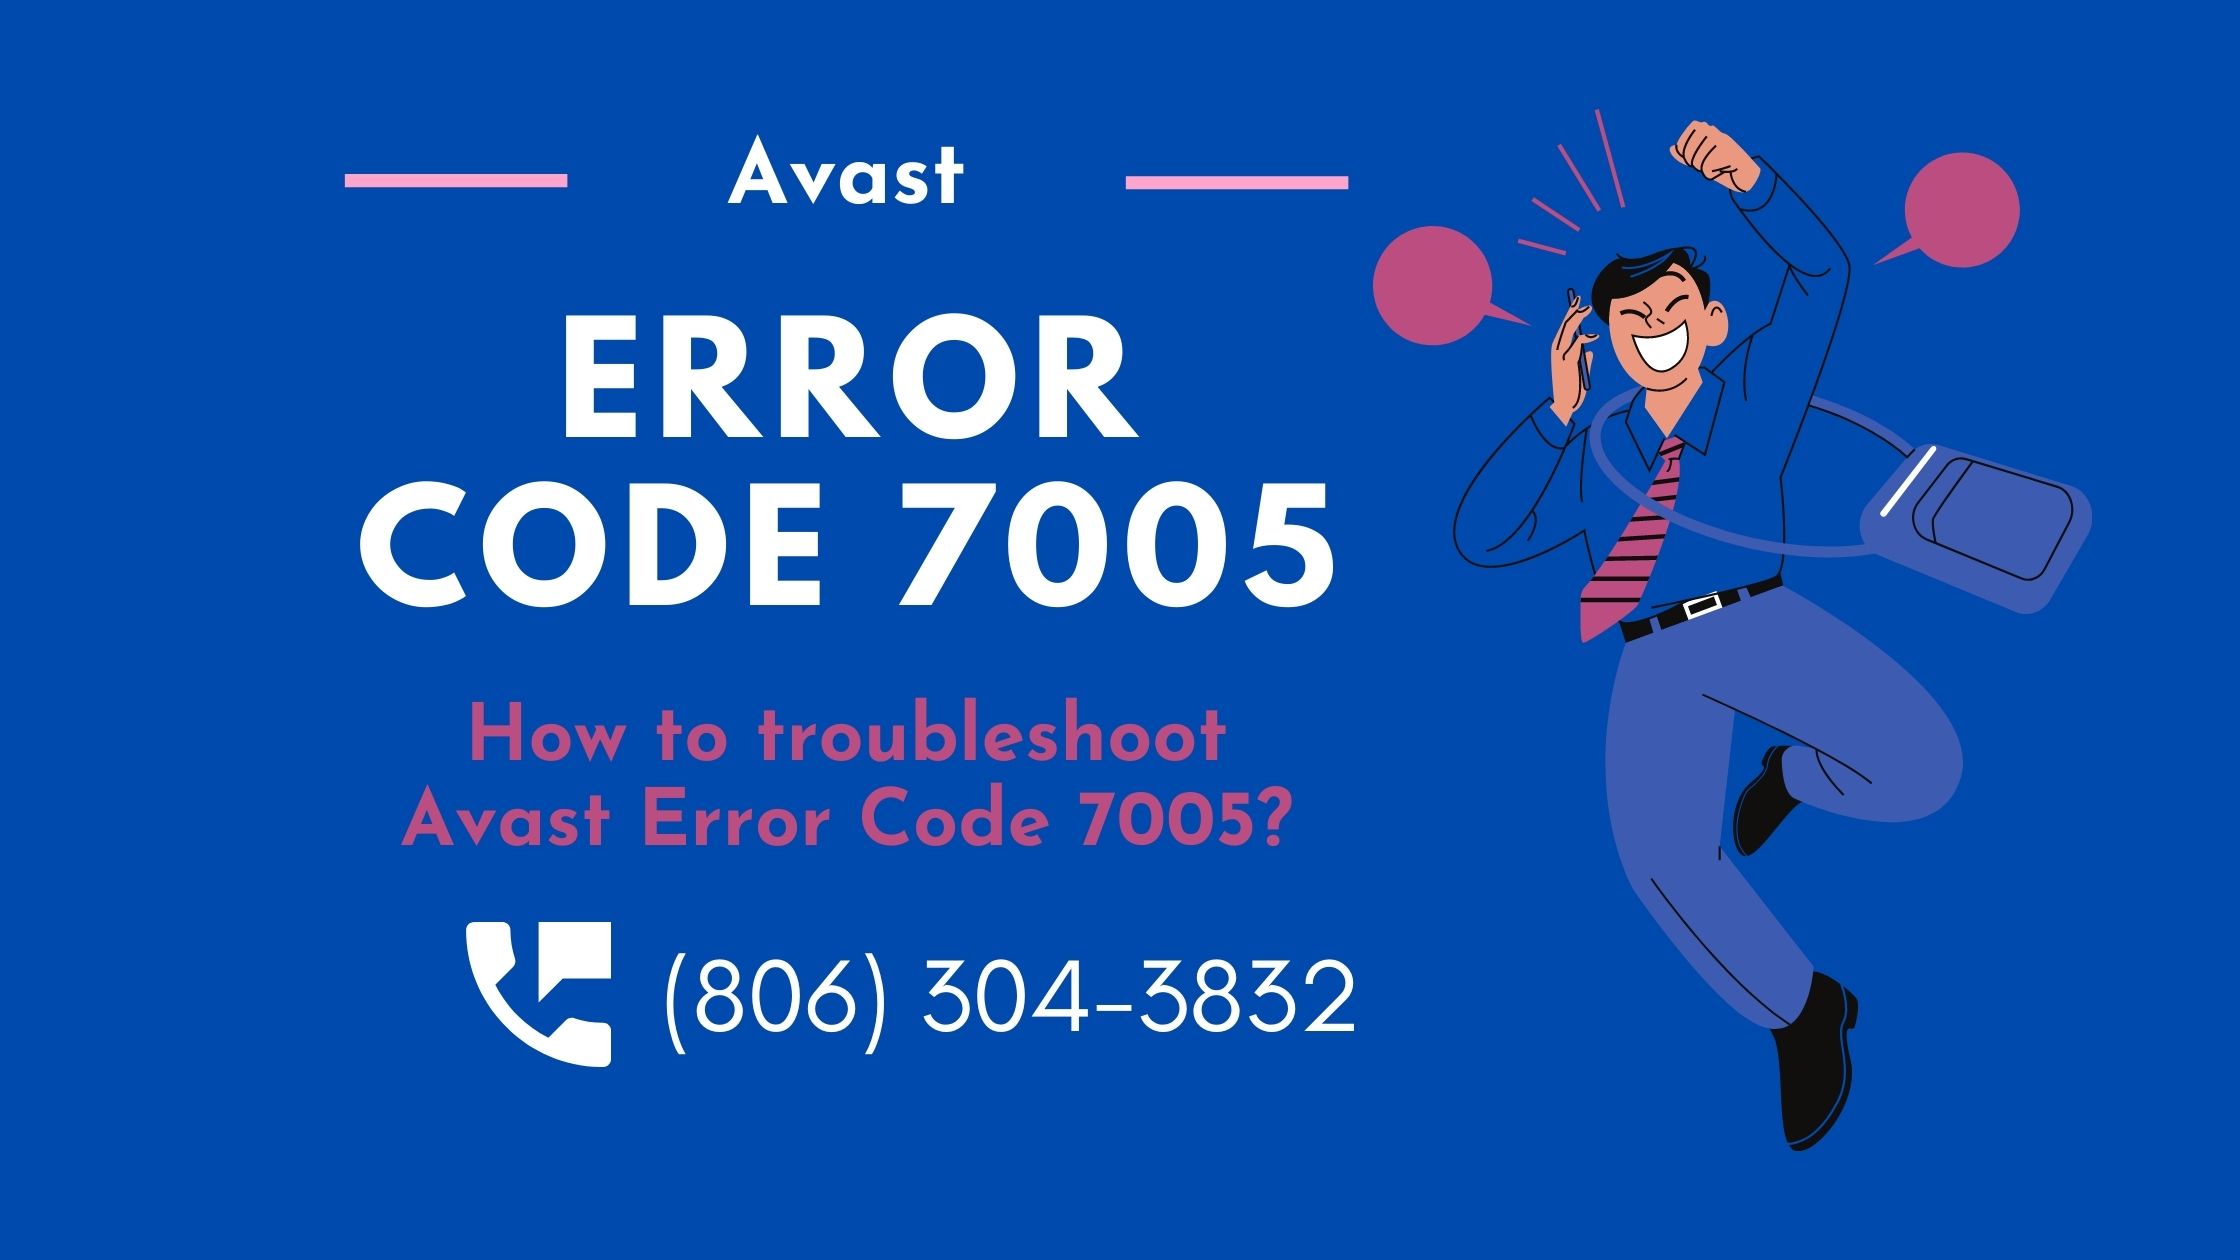 How to Troubleshoot Avast error code 7005 - (806) 304-3832 for Solution